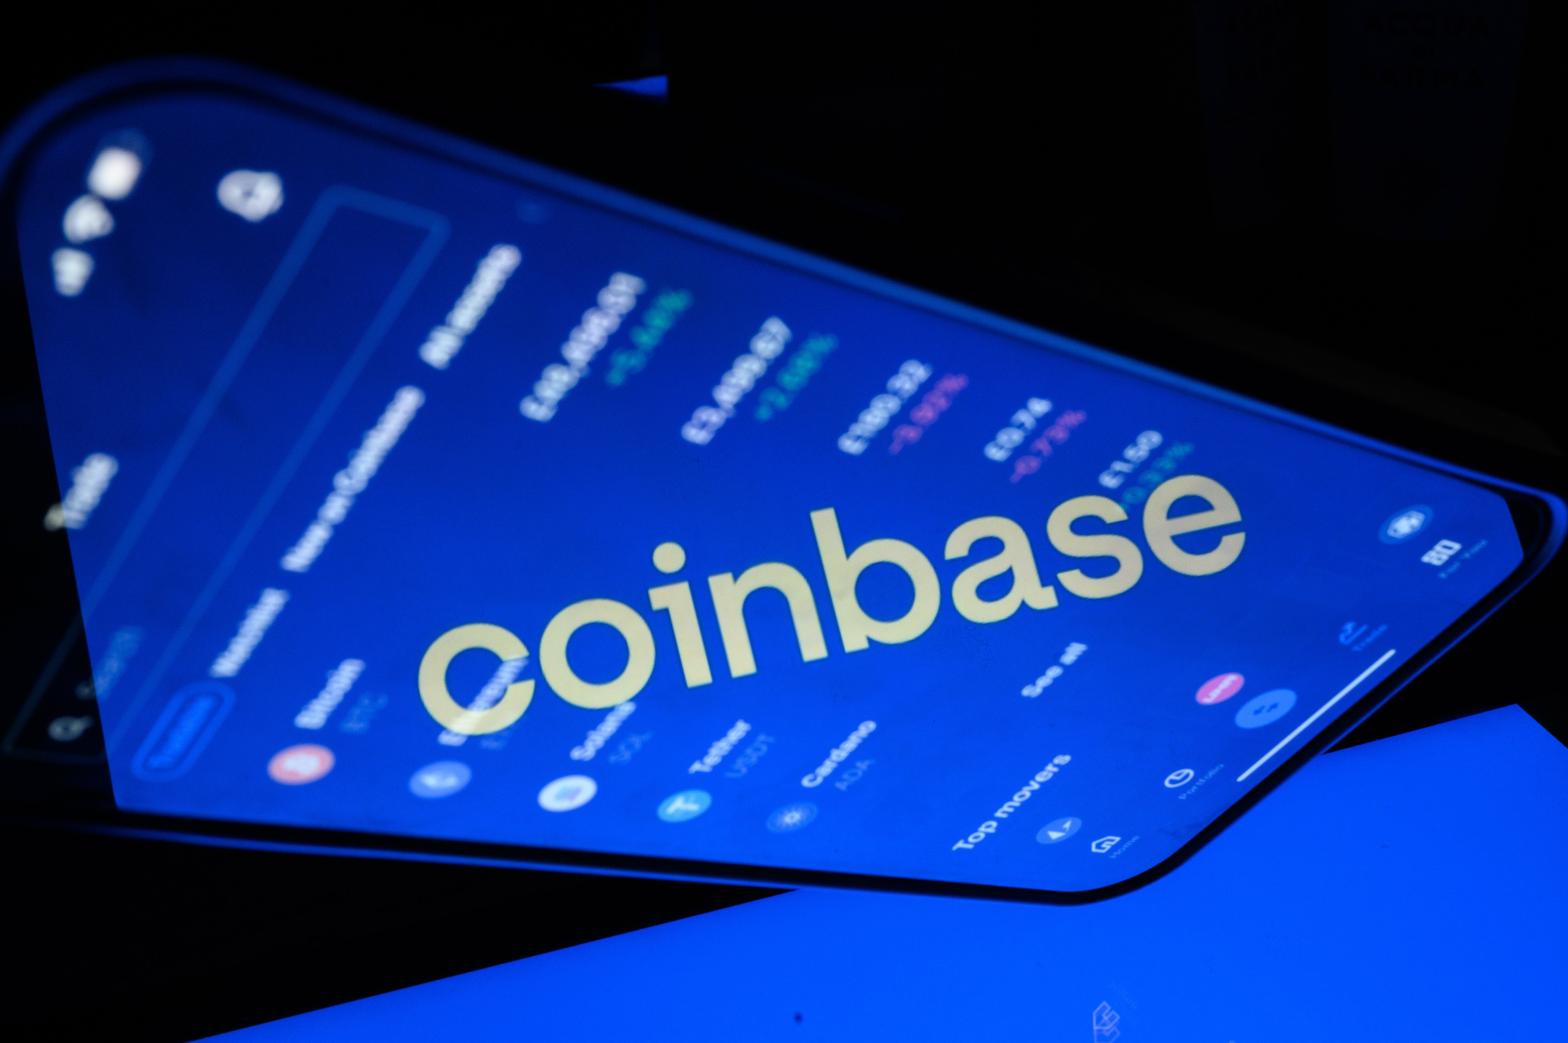 New language in an SEC filing has Coinbase users confused and nervous for the company's future. (Photo: Leon Neal, Getty Images)